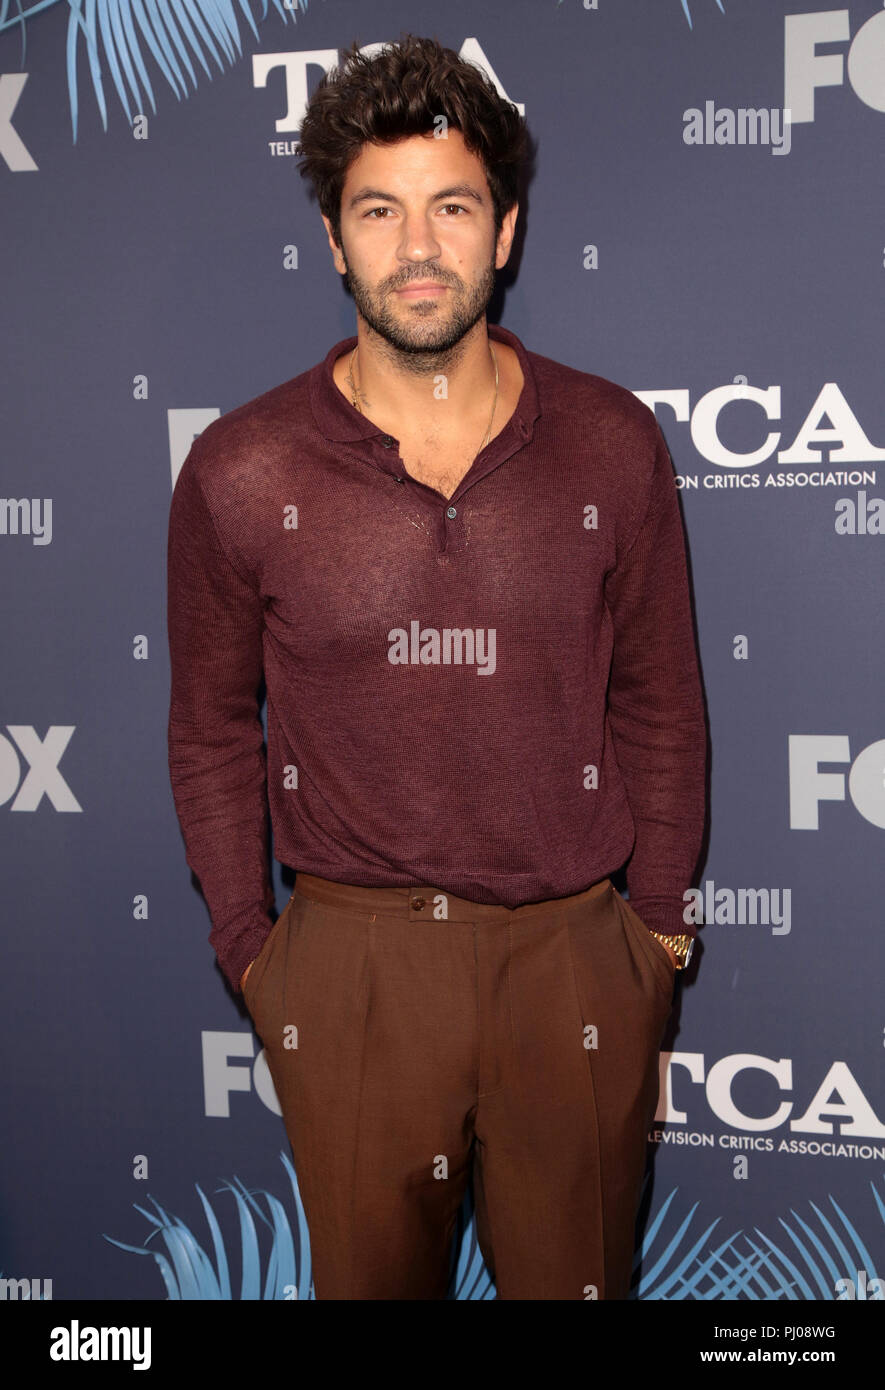 Celebrities attend FOX Summer All-Star Party, Arrivals, TCA Summer Press  Tour at Soho House West Hollywood. Featuring: Jordan Masterson Where: Los  Angeles, California, United States When: 03 Aug 2018 Credit: Brian  To/WENN.com